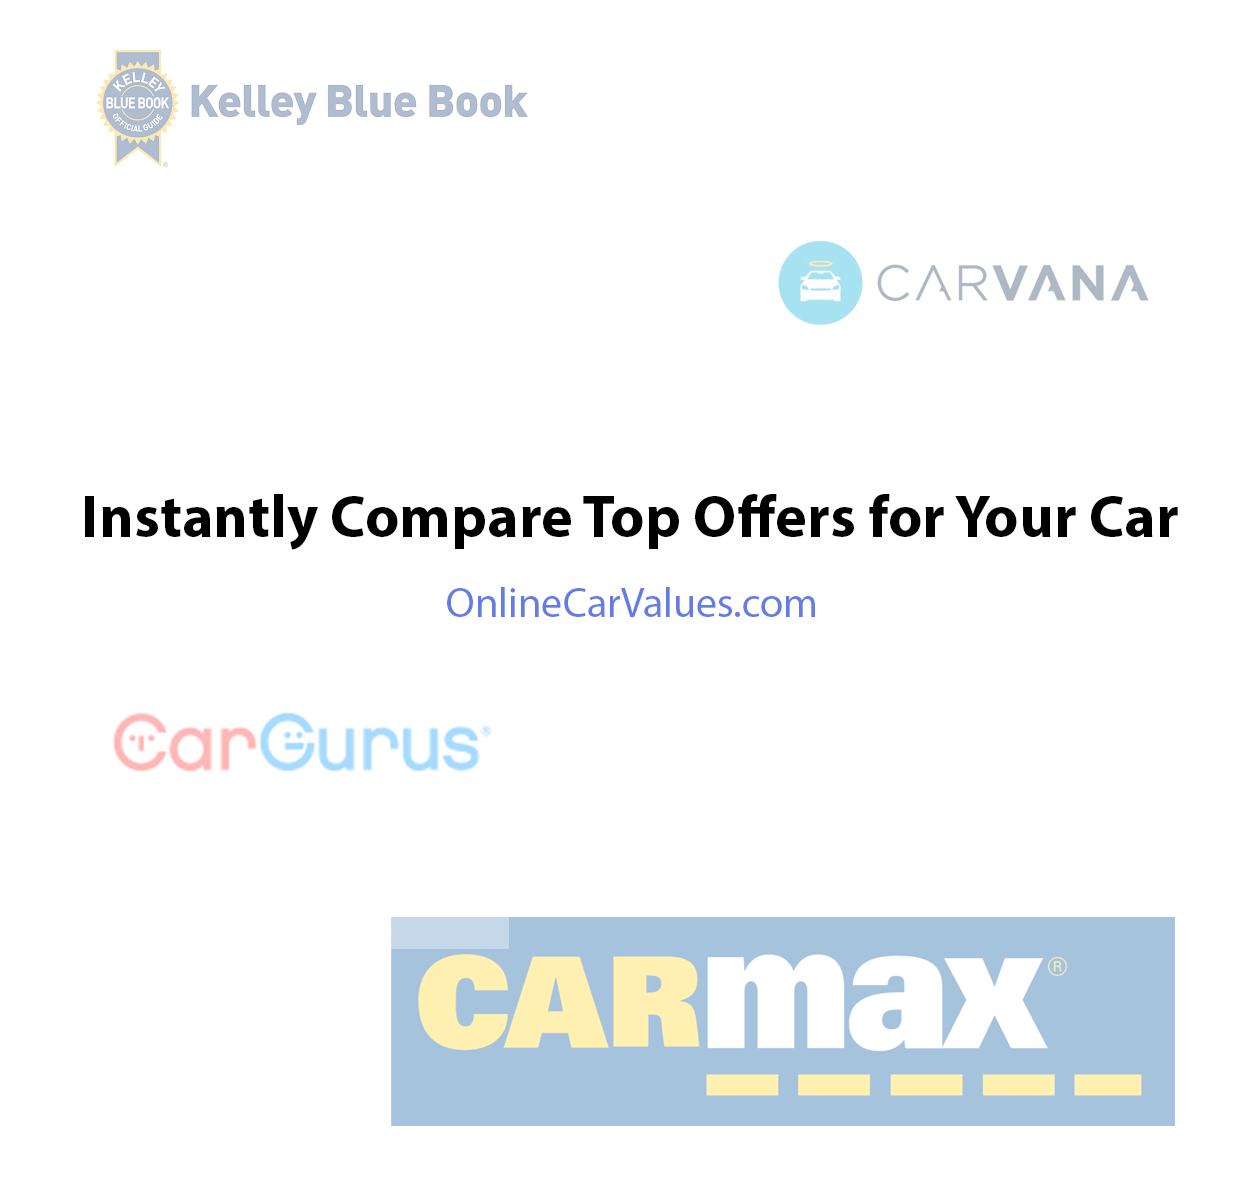 Discover Your Vehicle's Value at OnlineCarValues.com